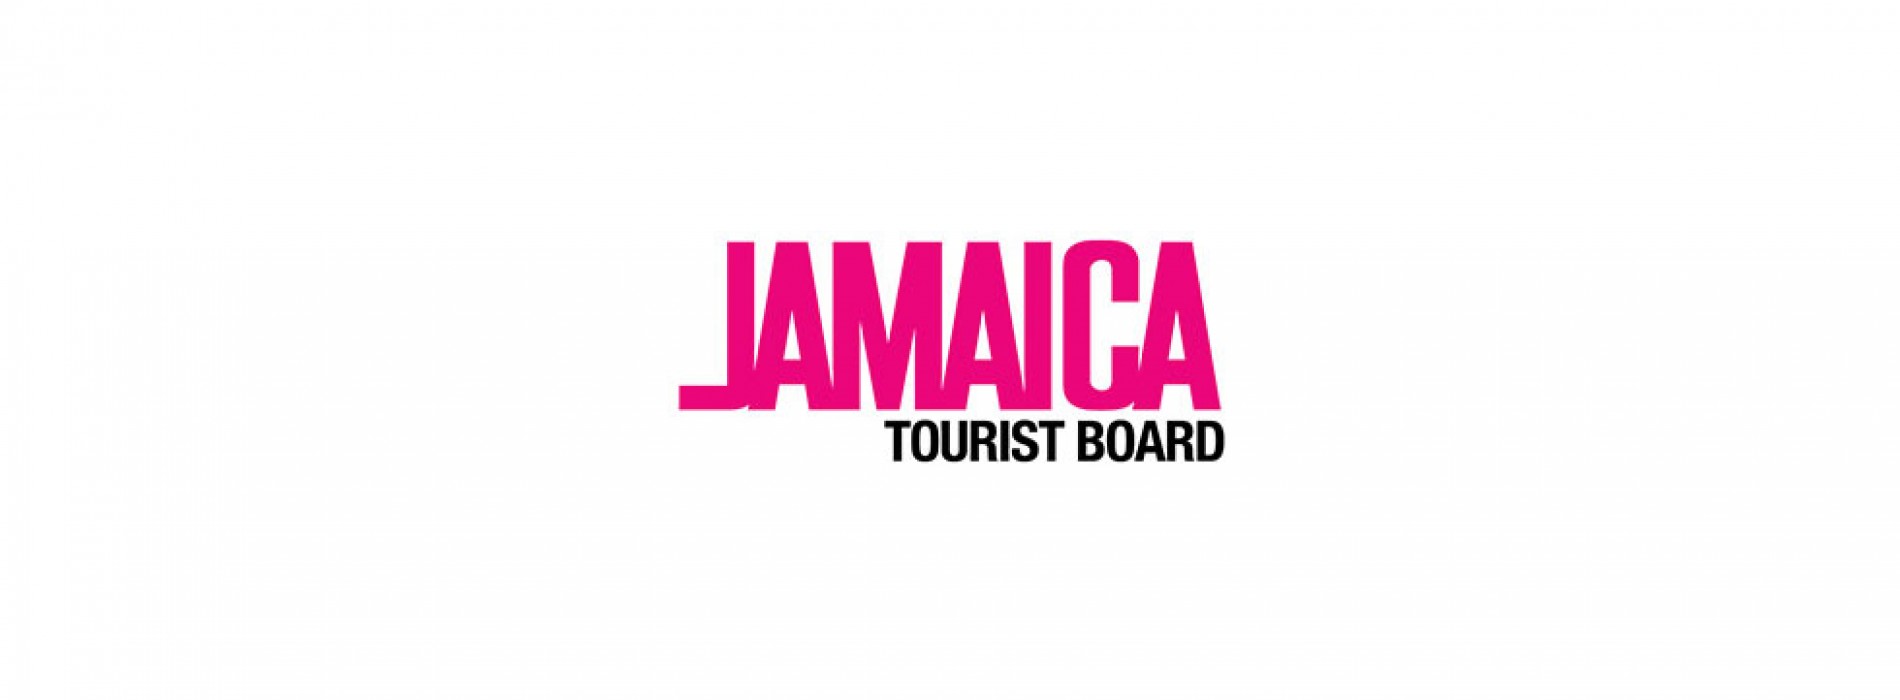 Jamaica welcomes record number of UK visitors in 2015